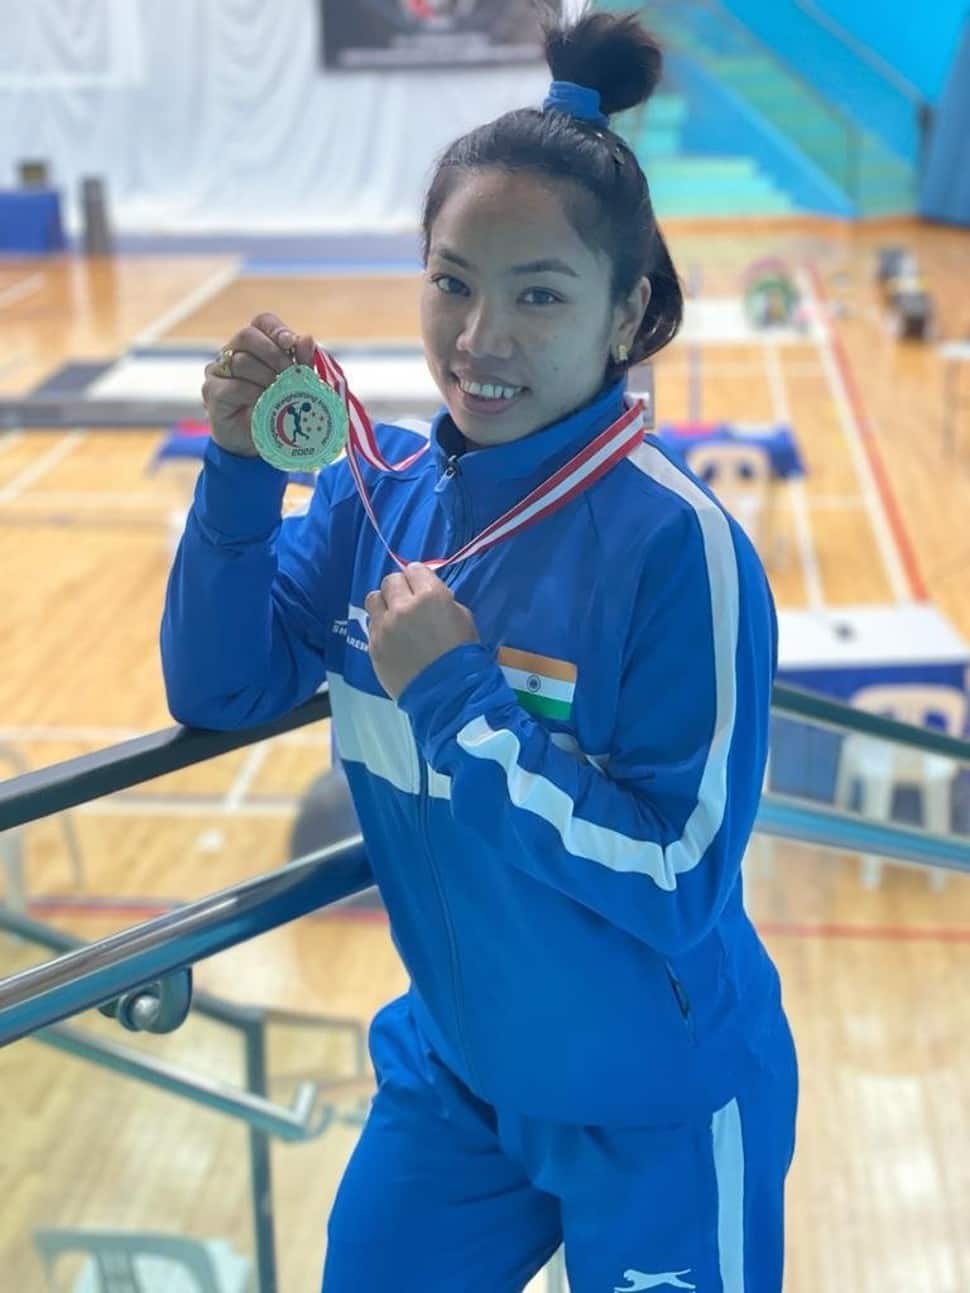 Mirabai Chanu missed gold at Tokyo by a whisker. A gold at CWG would certainly curb the pain of the loss at Tokyo. She would be gunning for gold. (Source: Twitter)